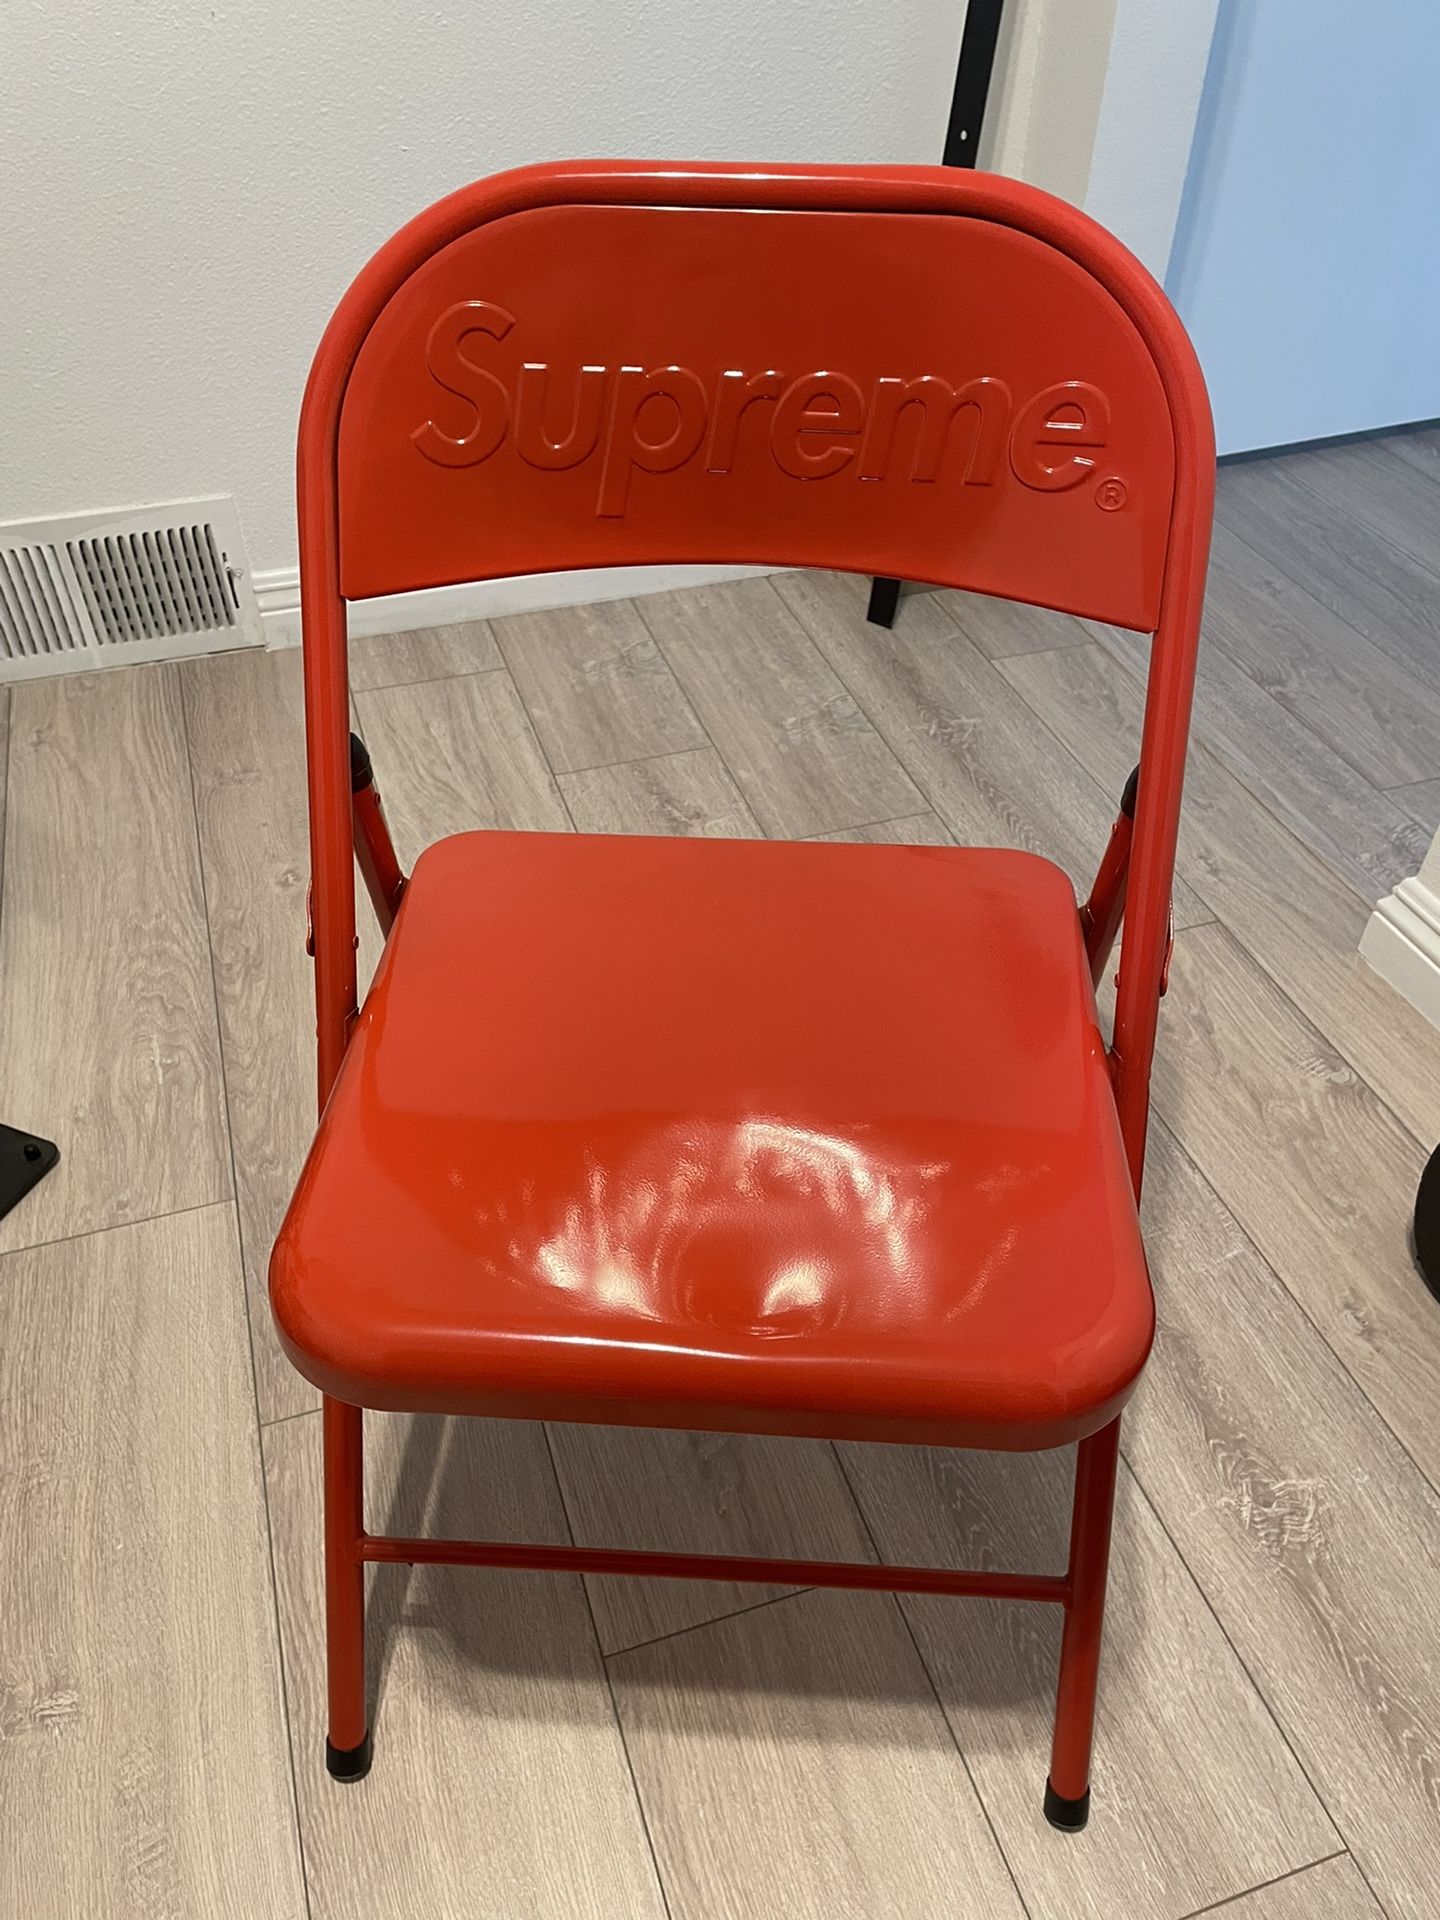 Supreme Metal Folding Chair for Sale in Chino Hills, CA - OfferUp